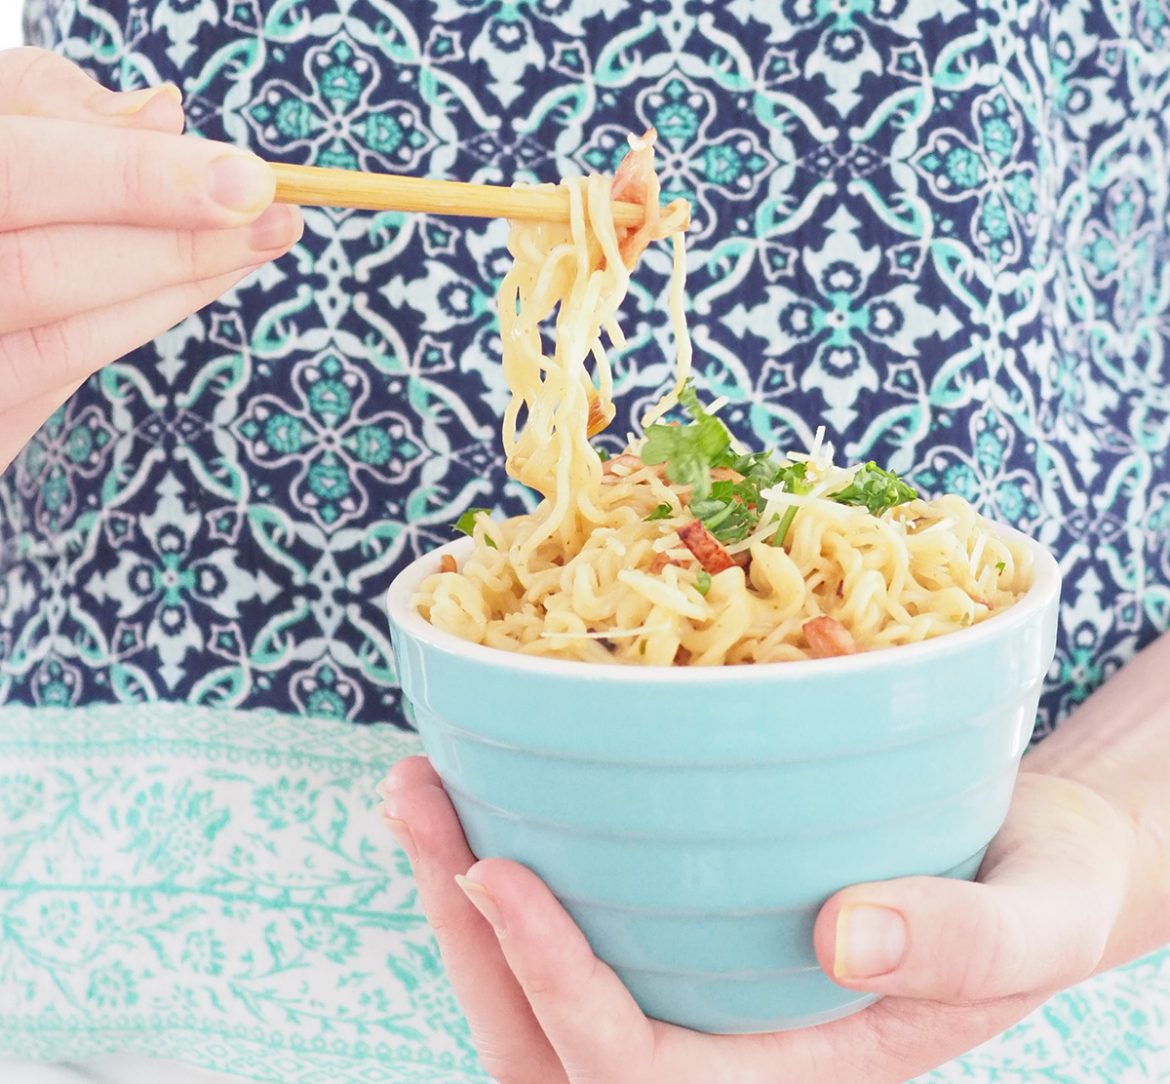 5 clever and quick ways to jazz up MAGGI 2 minute noodles, easy for the kids to make and is a tasty solution for an after school snack. Plus enter to win a $150 Woolworths Gift Card, which would be so handy to fill the fridge with food!